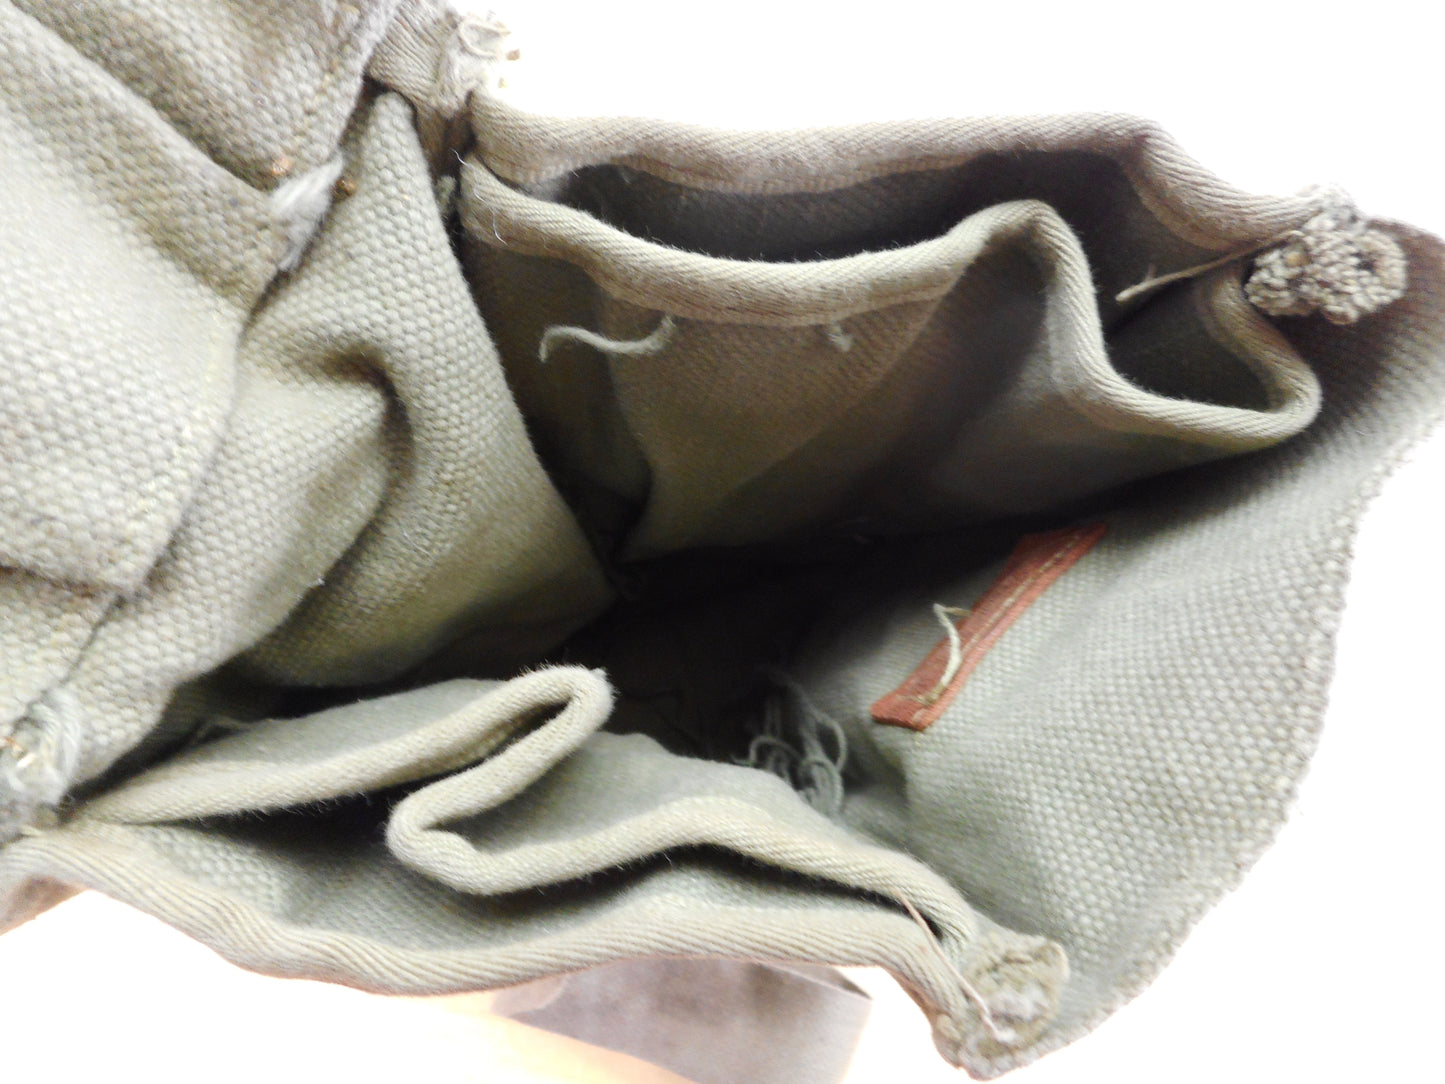 US Army WWII Canvas Leather Light Instrument Bag Pouch